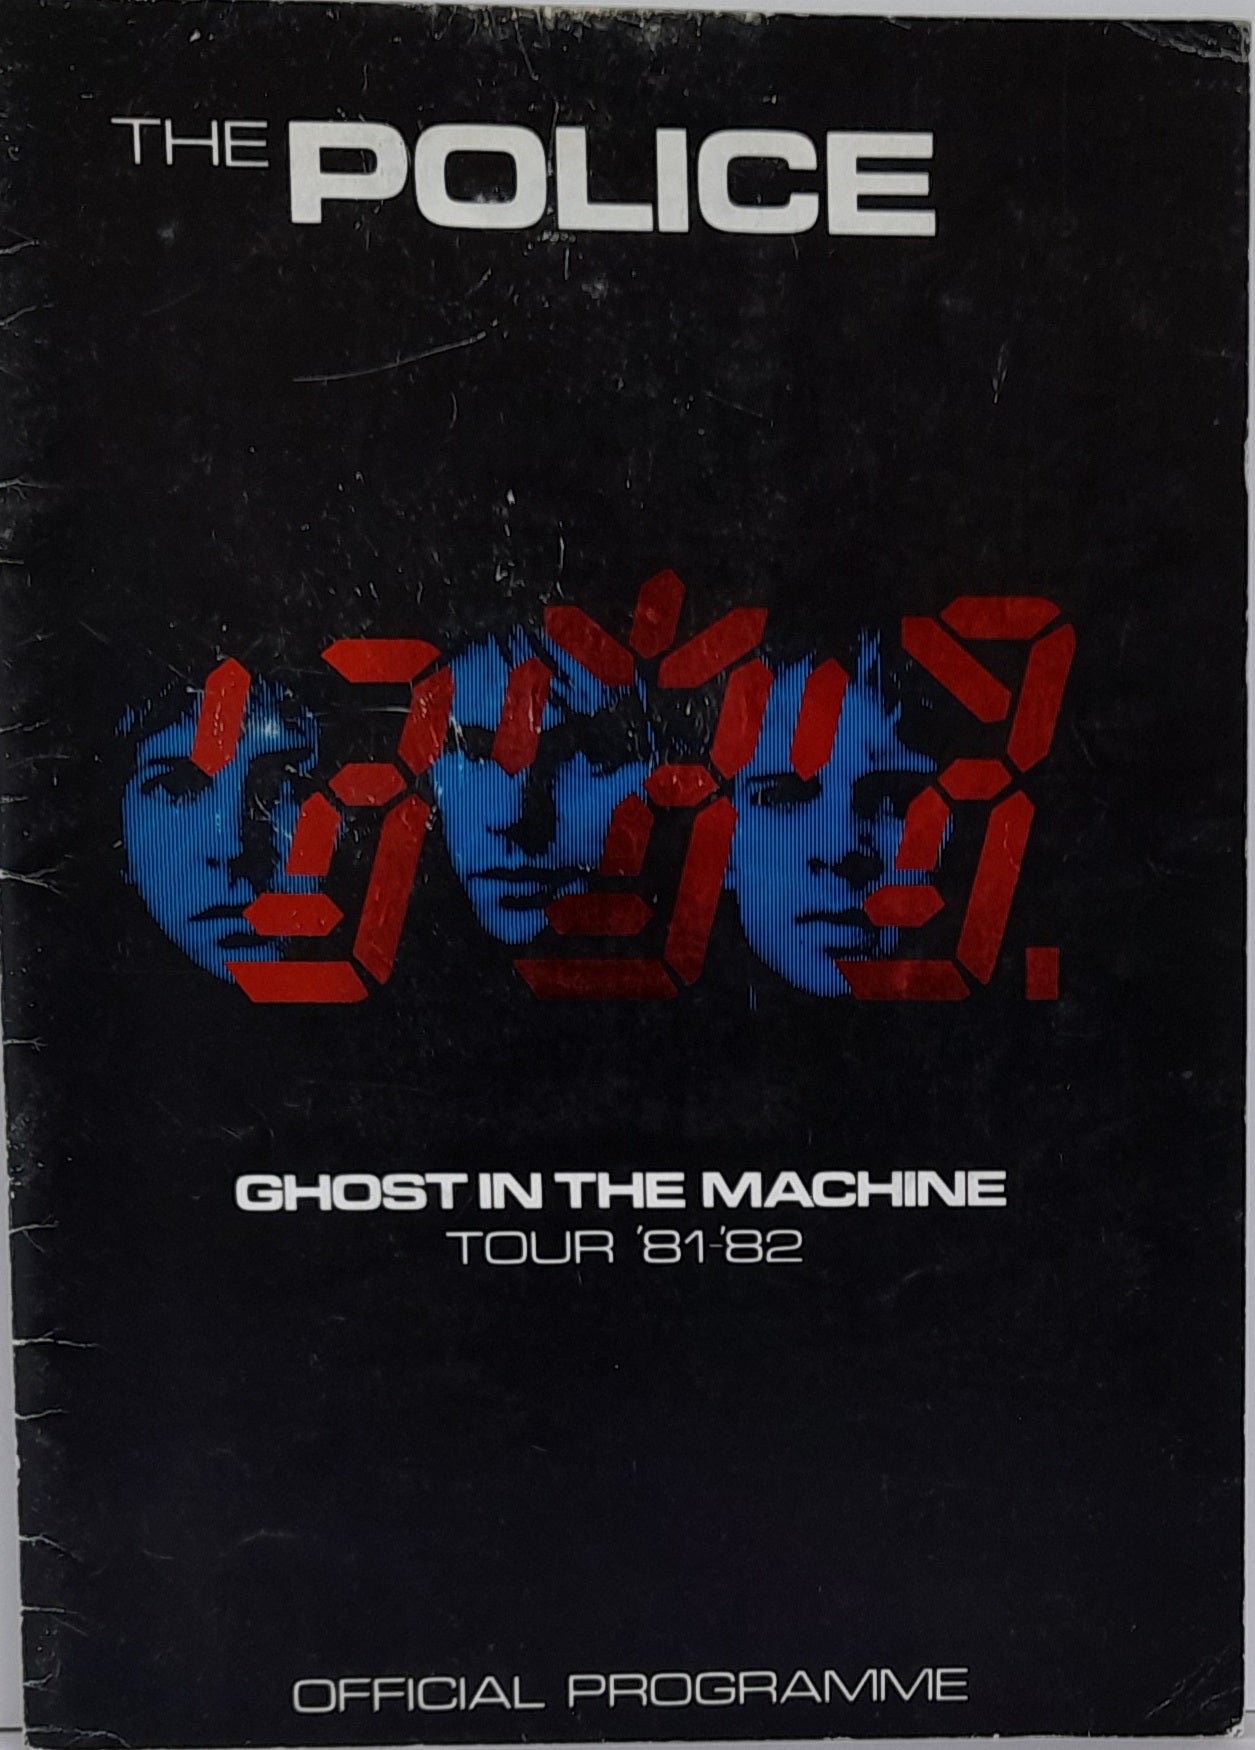 The Police - Ghost In The Machine Tour 81-82 Programme